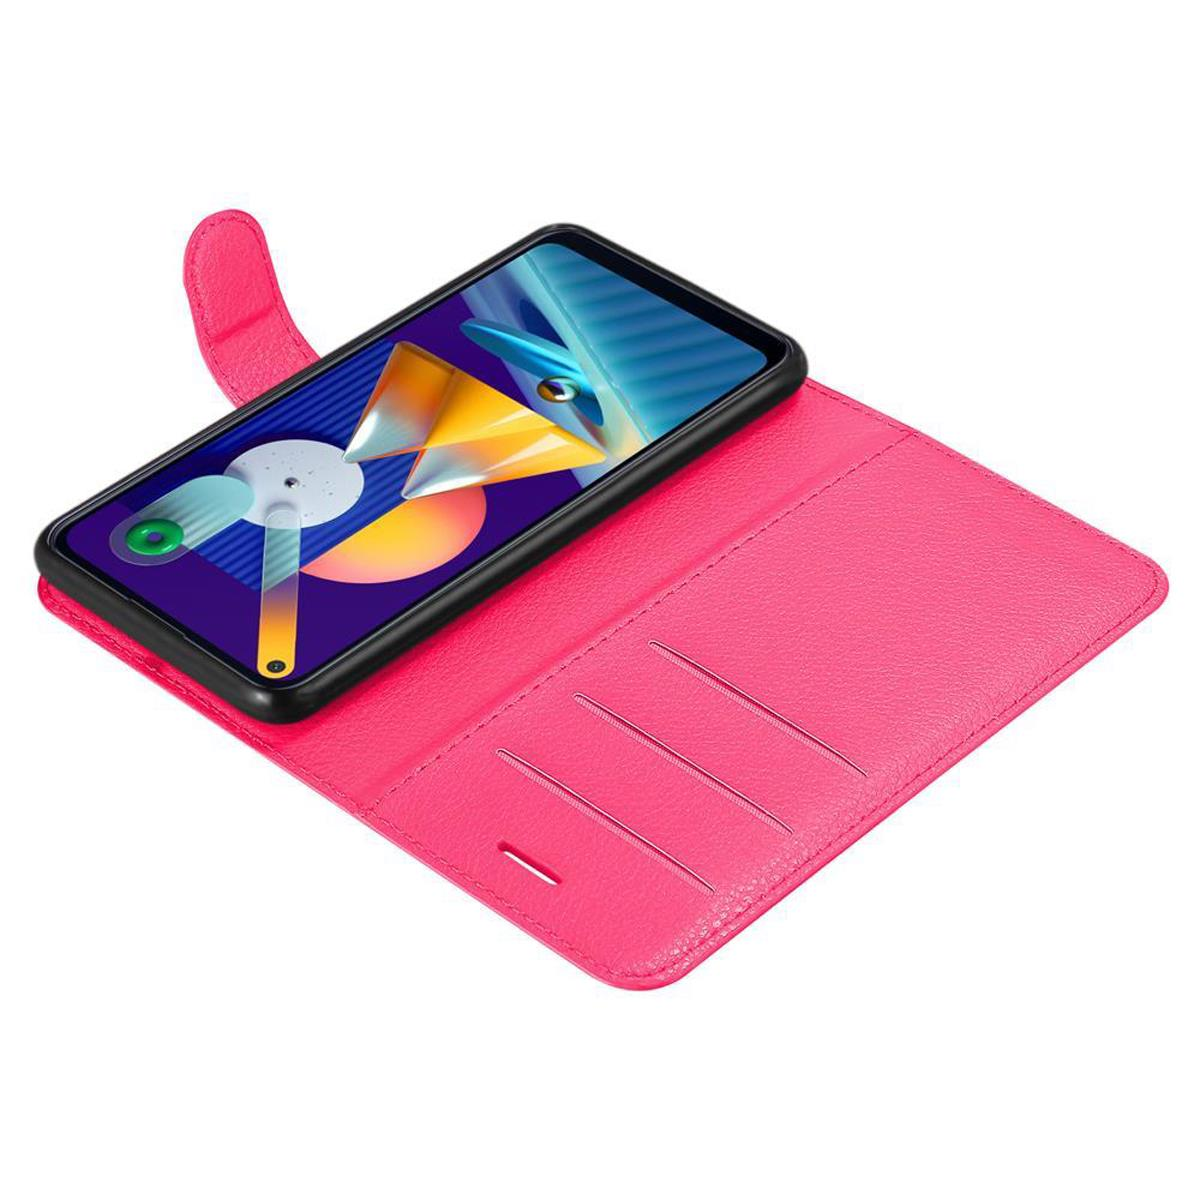 CADORABO Standfunktion, Bookcover, Book Galaxy M11, / A11 CHERRY PINK Hülle Samsung,